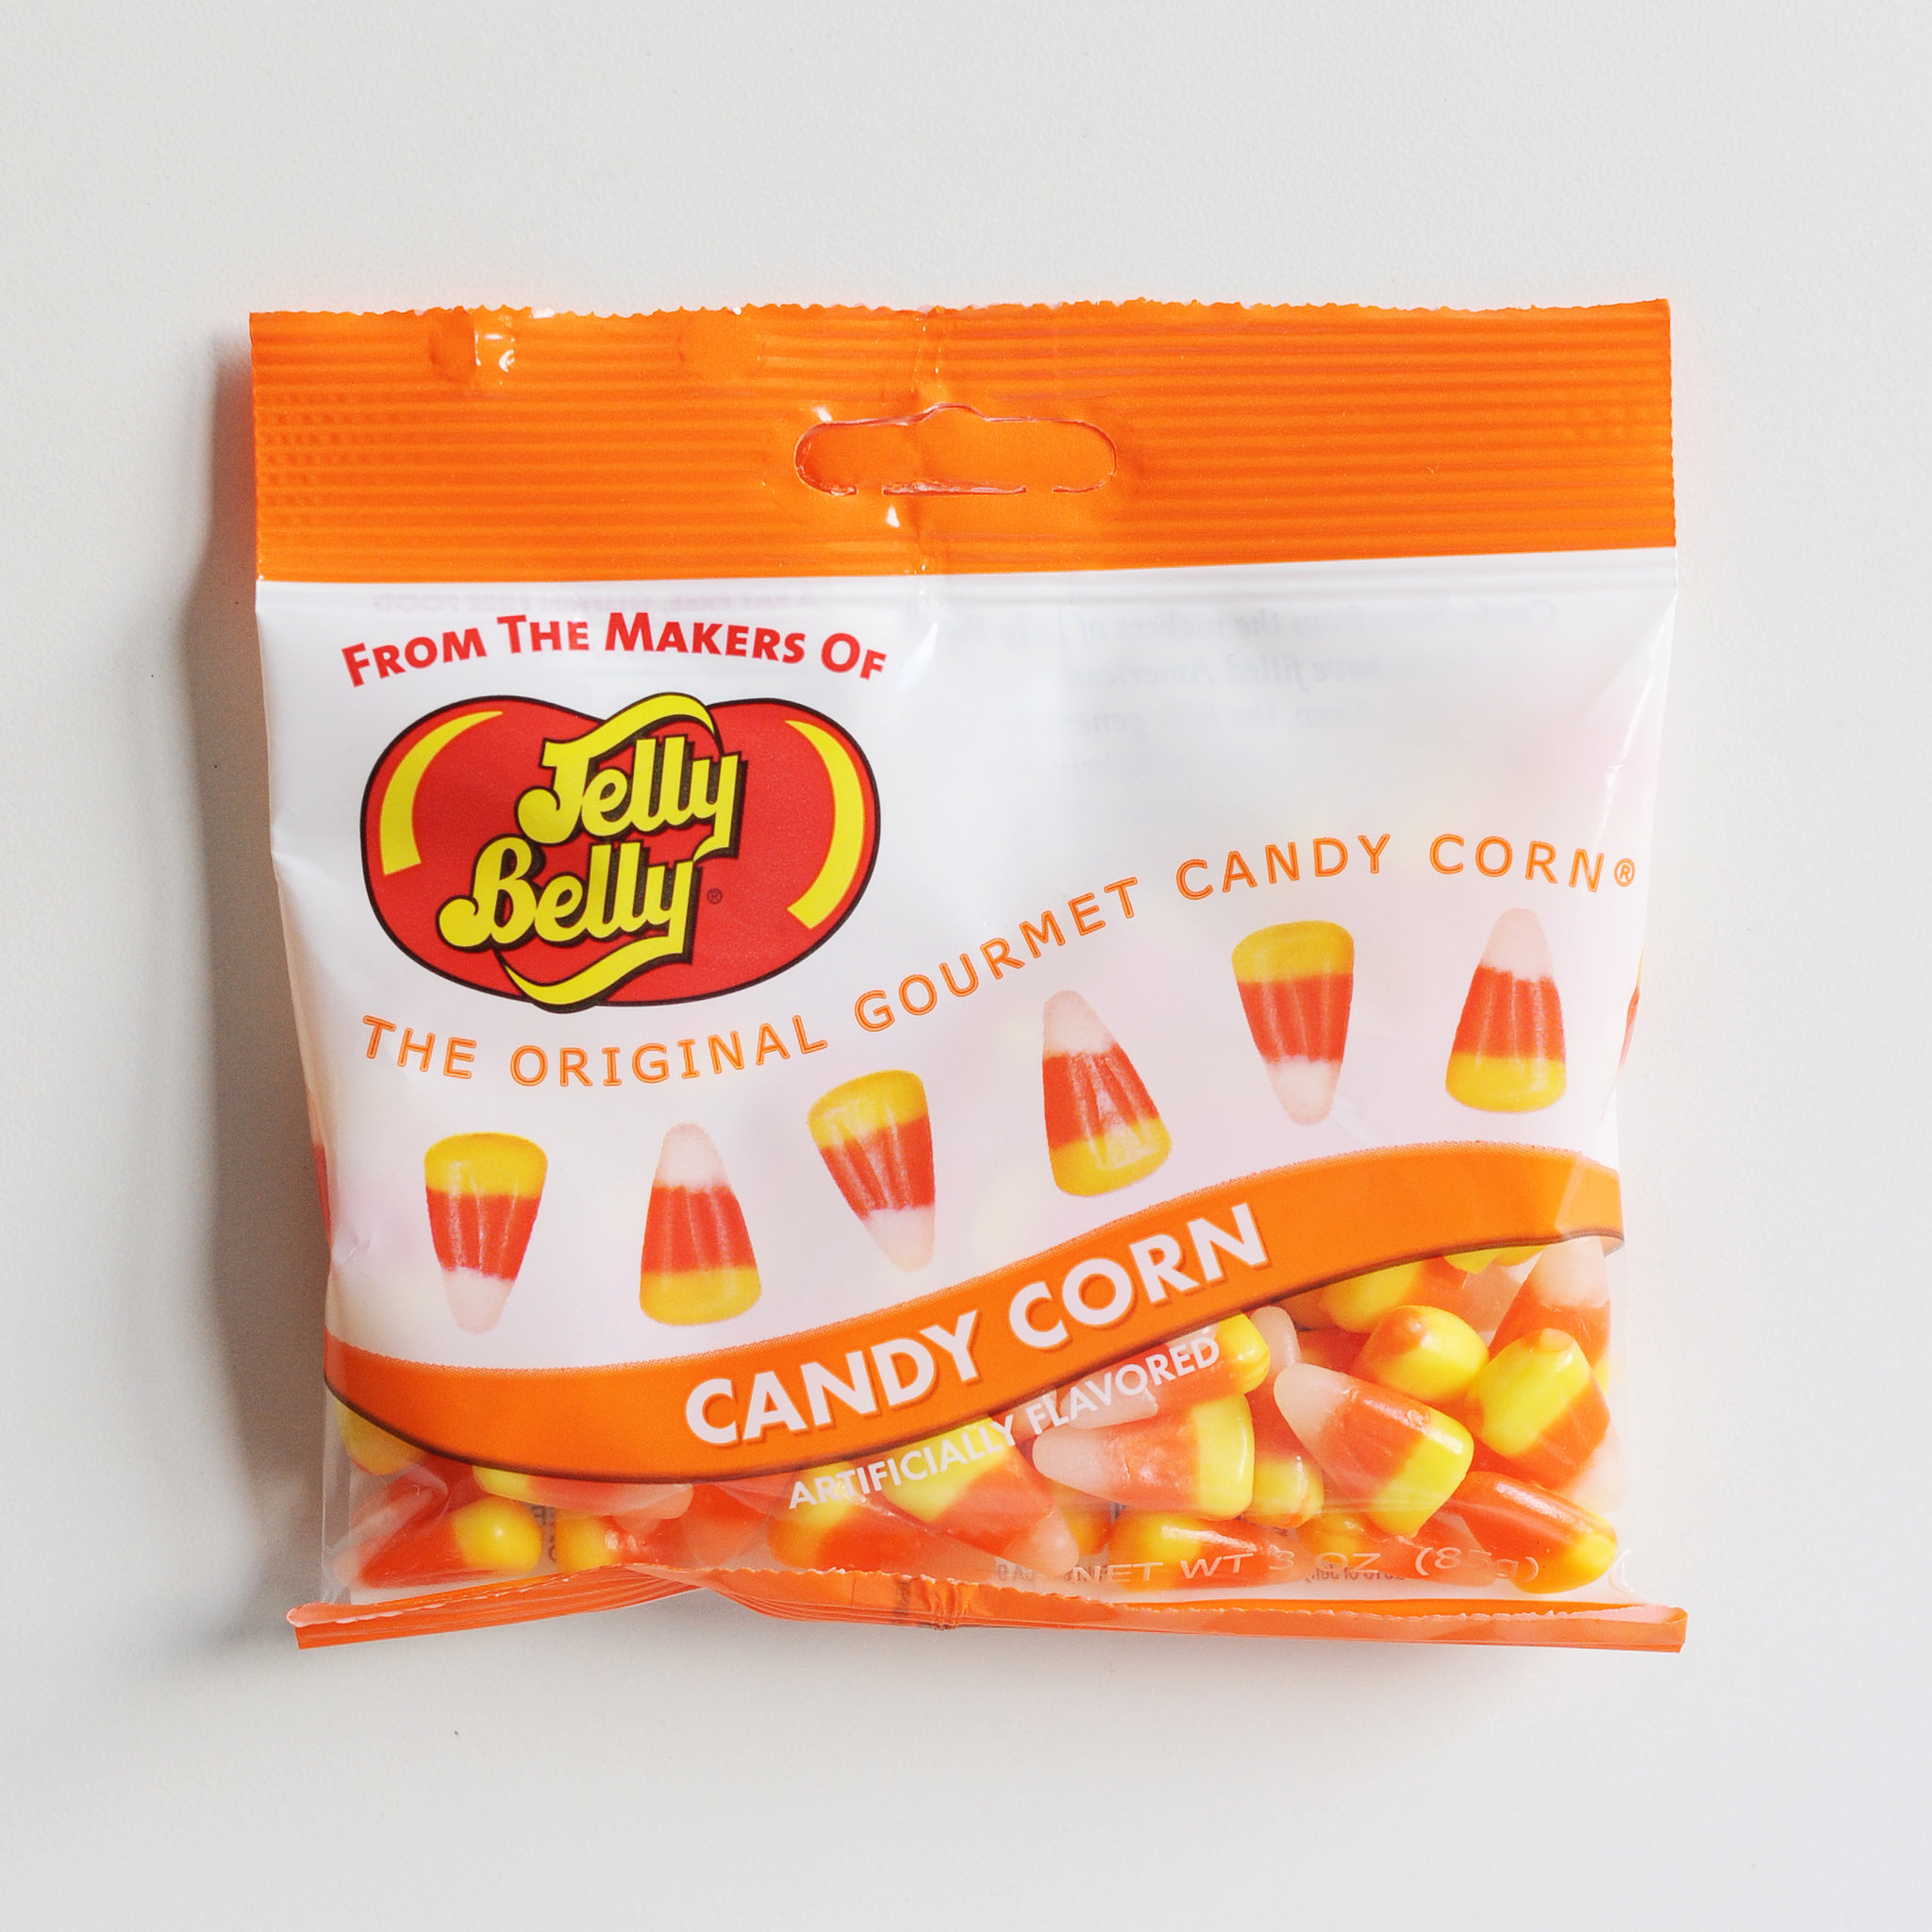 2. Jelly Belly Candy Corn.